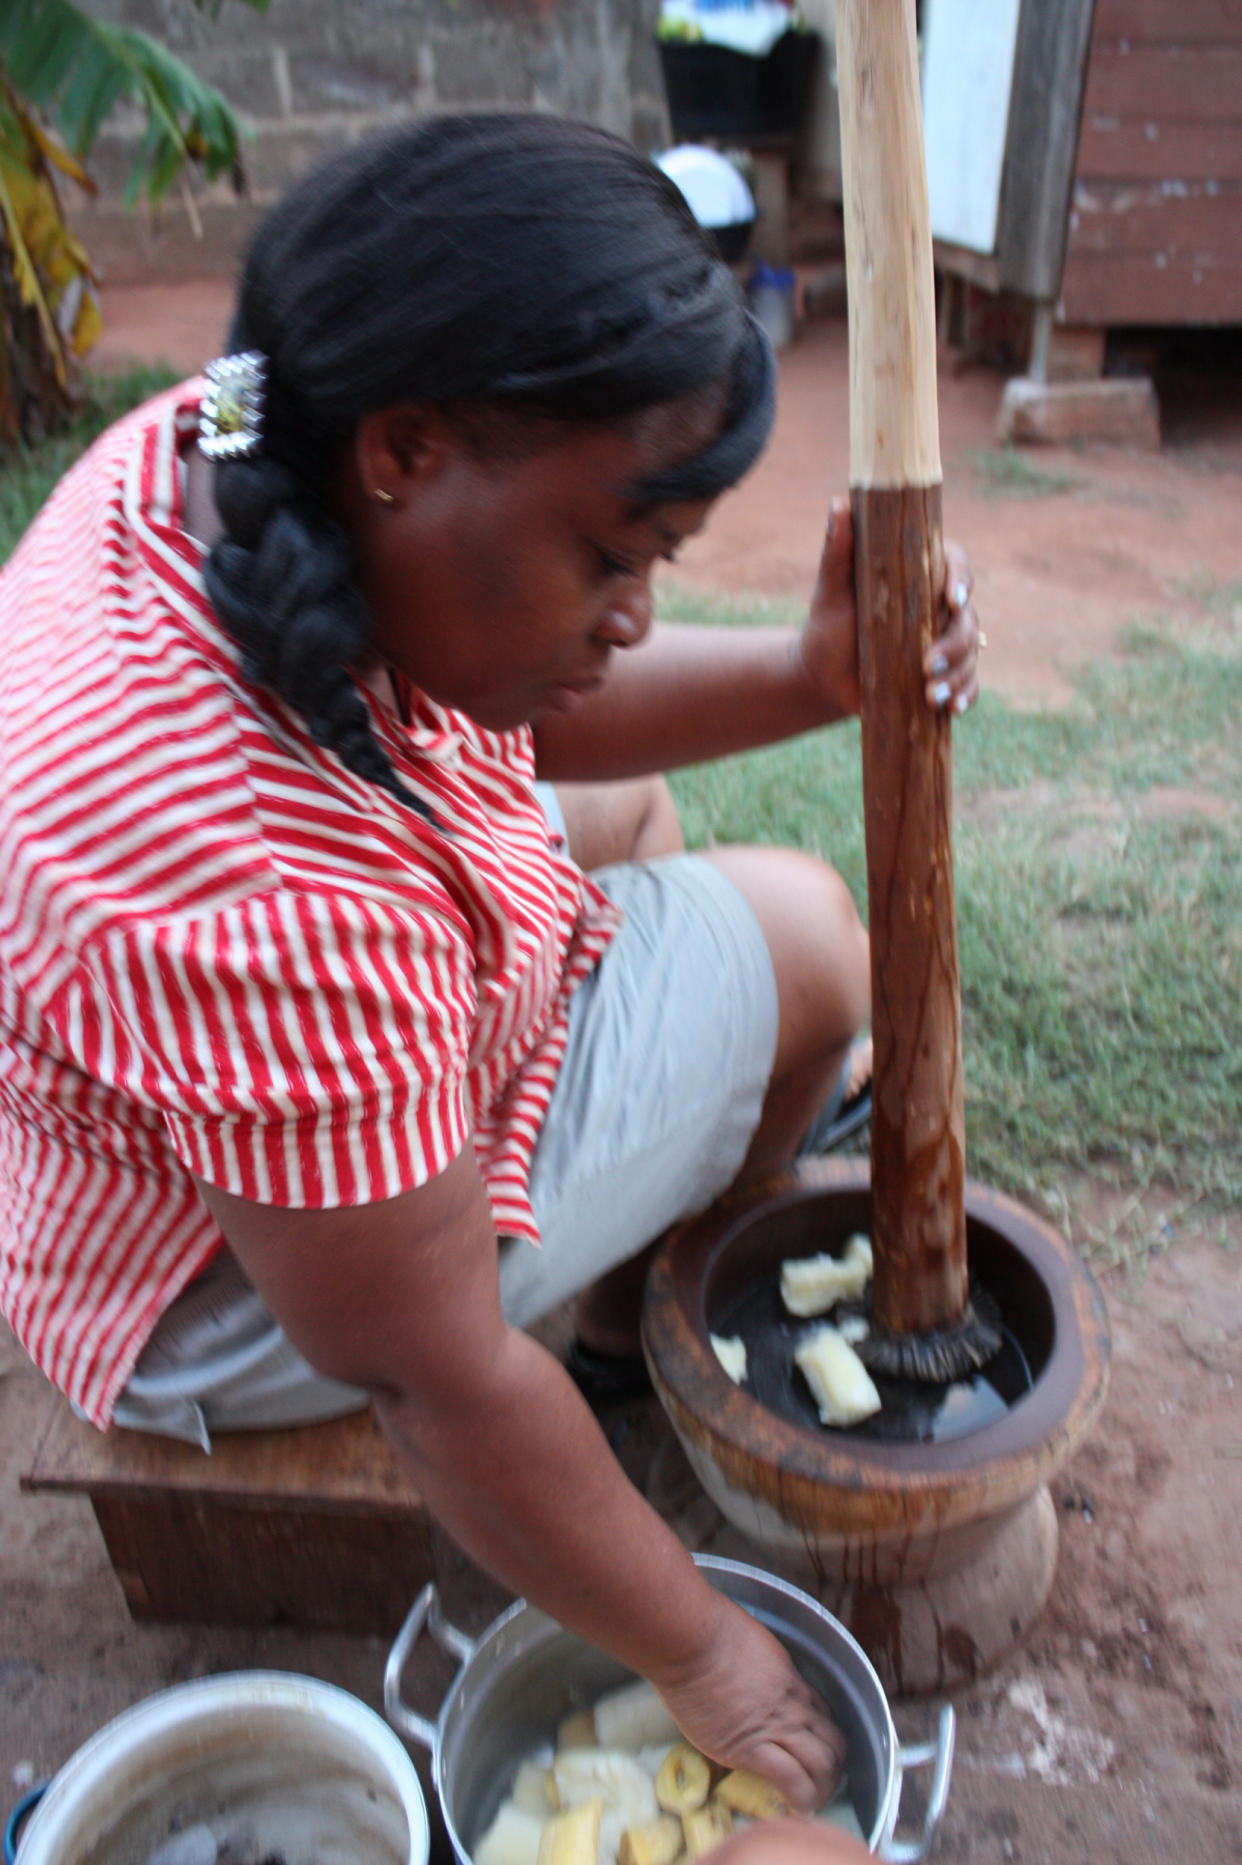 My aunt Evelyn is a human fufu machine, so she can easily handle it on her own, but I’ve often seen two to three people over a large mortar and pestle putting in the work for large celebrations or occasions. (Zoe Adjonyoh)